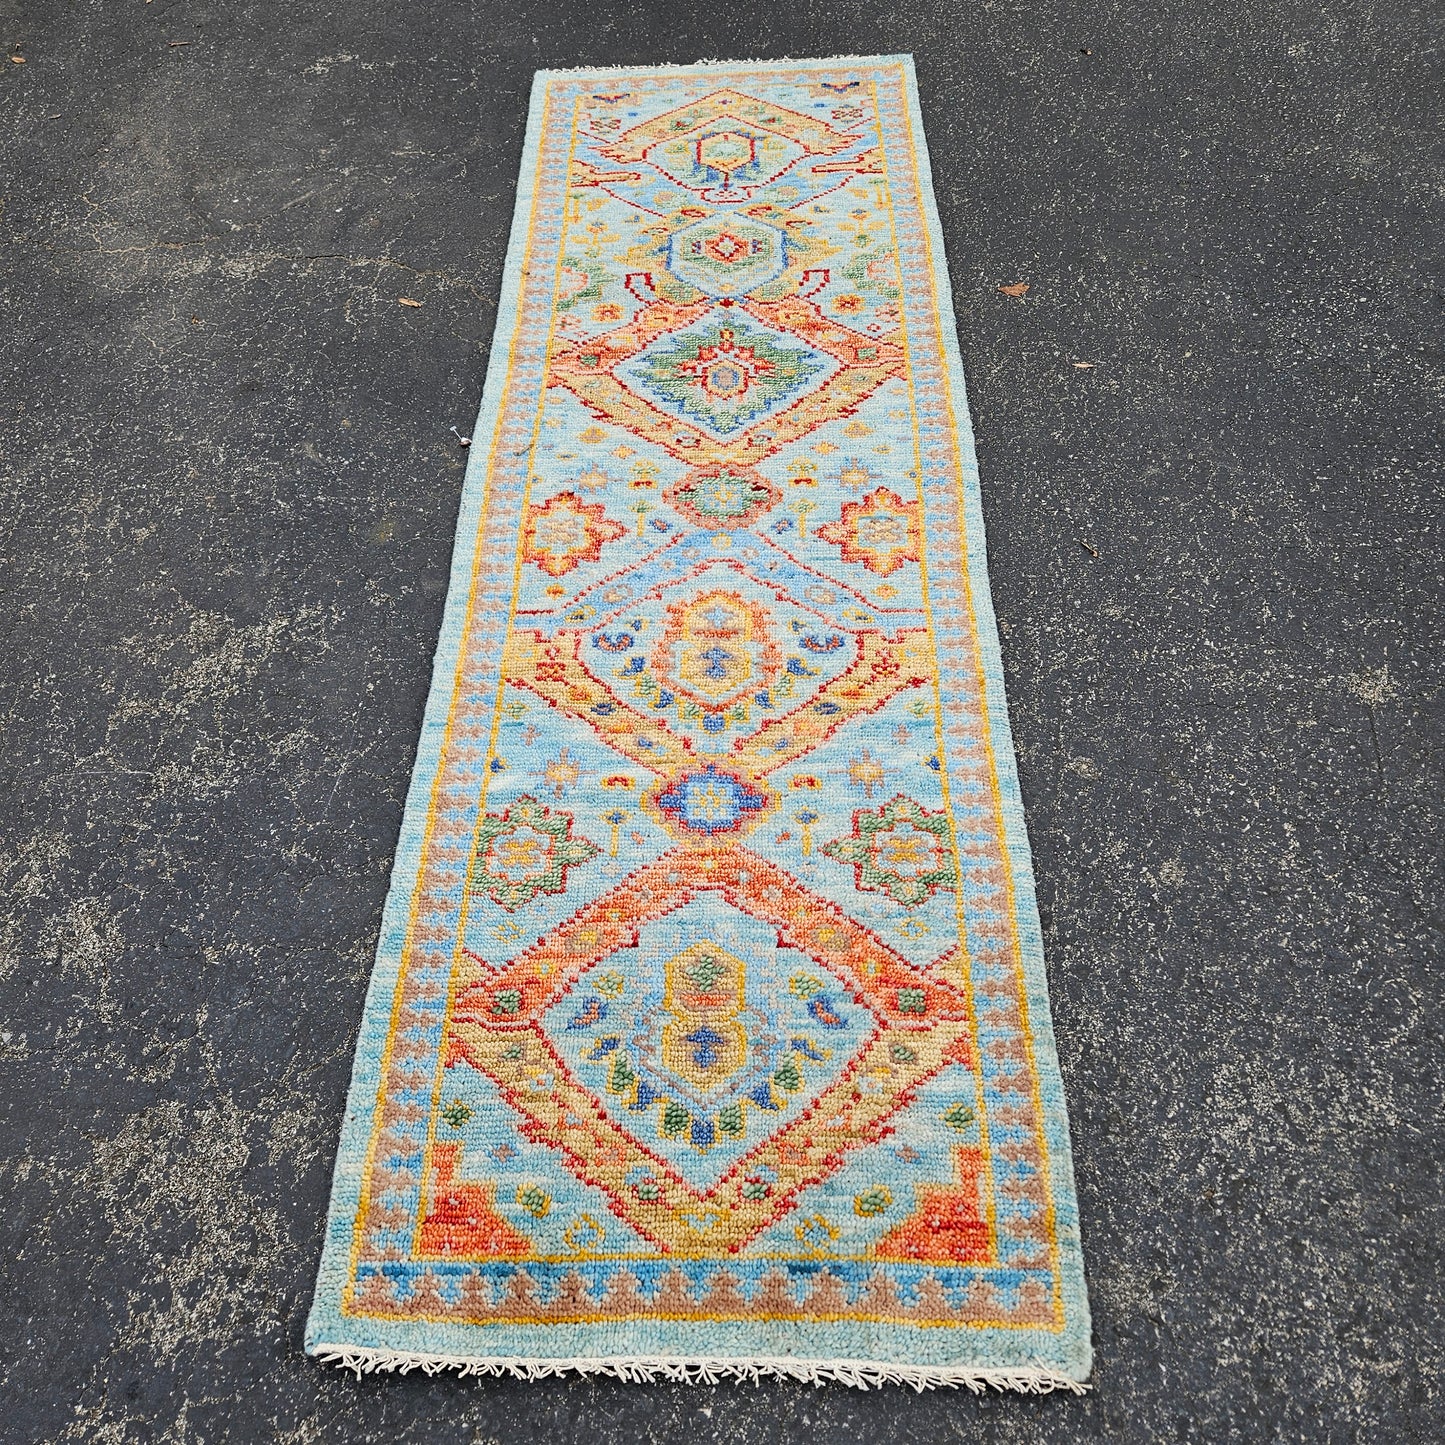 100% Wool Hand Knotted Beautiful Multi Colored Runner Rug / Carpet- 2' 6" x 8'